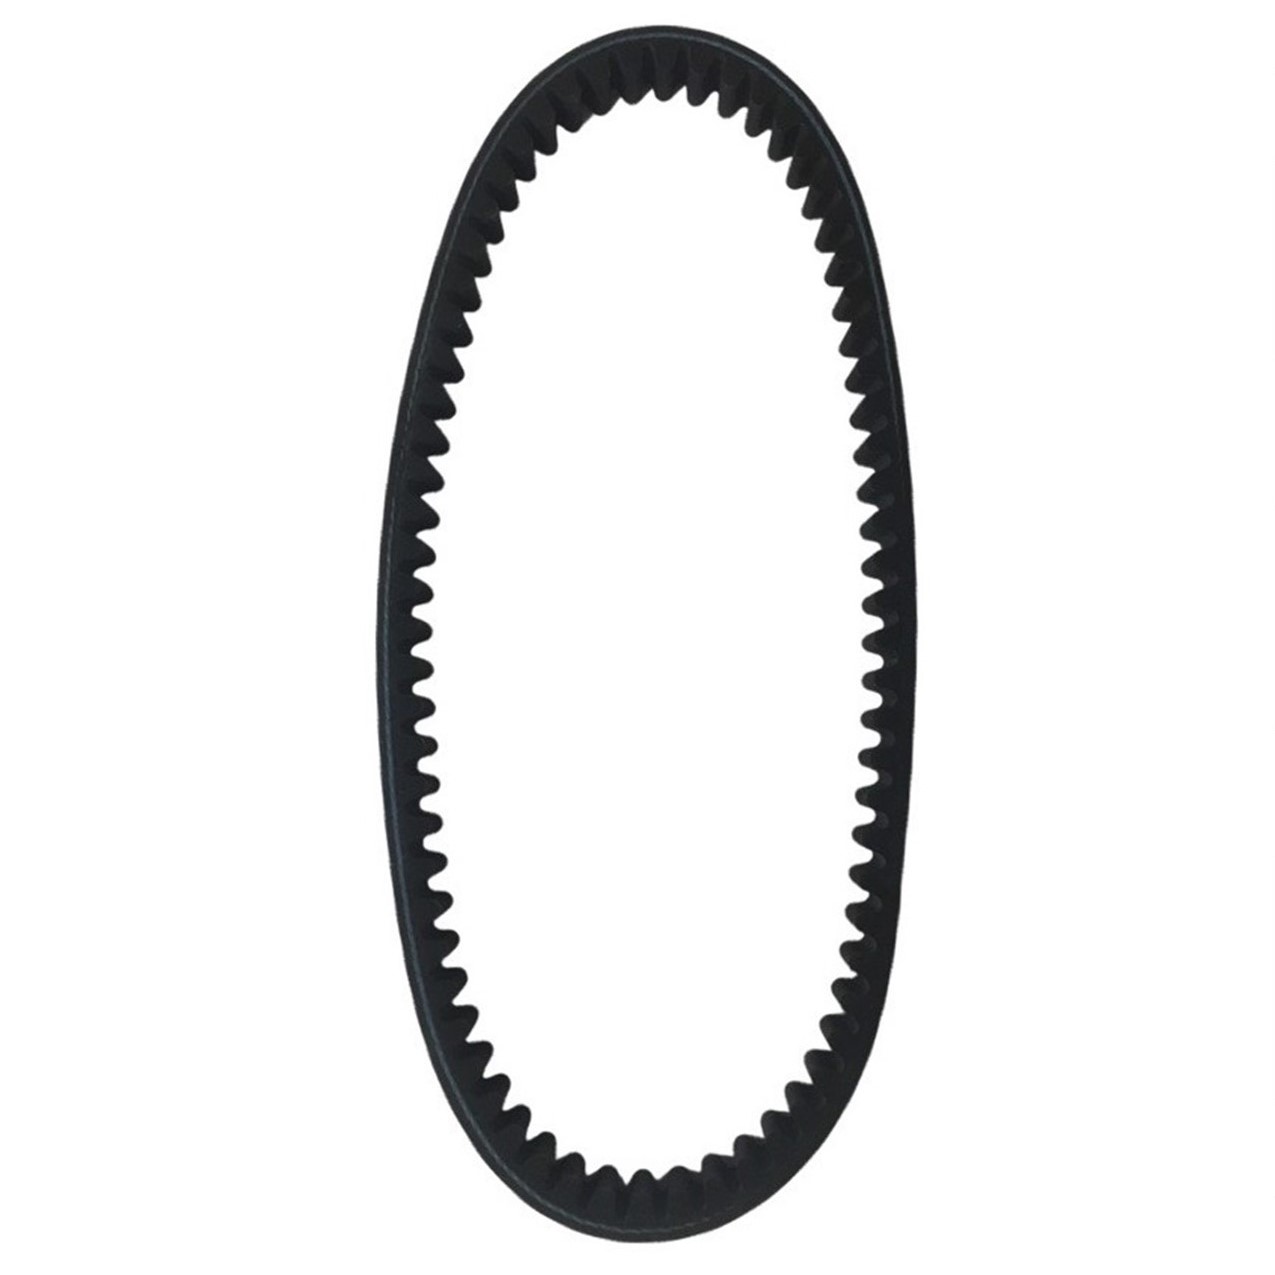 Clutch Drive Belt Fits 2007-2013 E-Ton Viper RXL70, RX4-70, RXL90R, RX4-90R, Rover UK1, Rover GT UK2, Yamaha Raptor 90 09-13 ATVs + other models